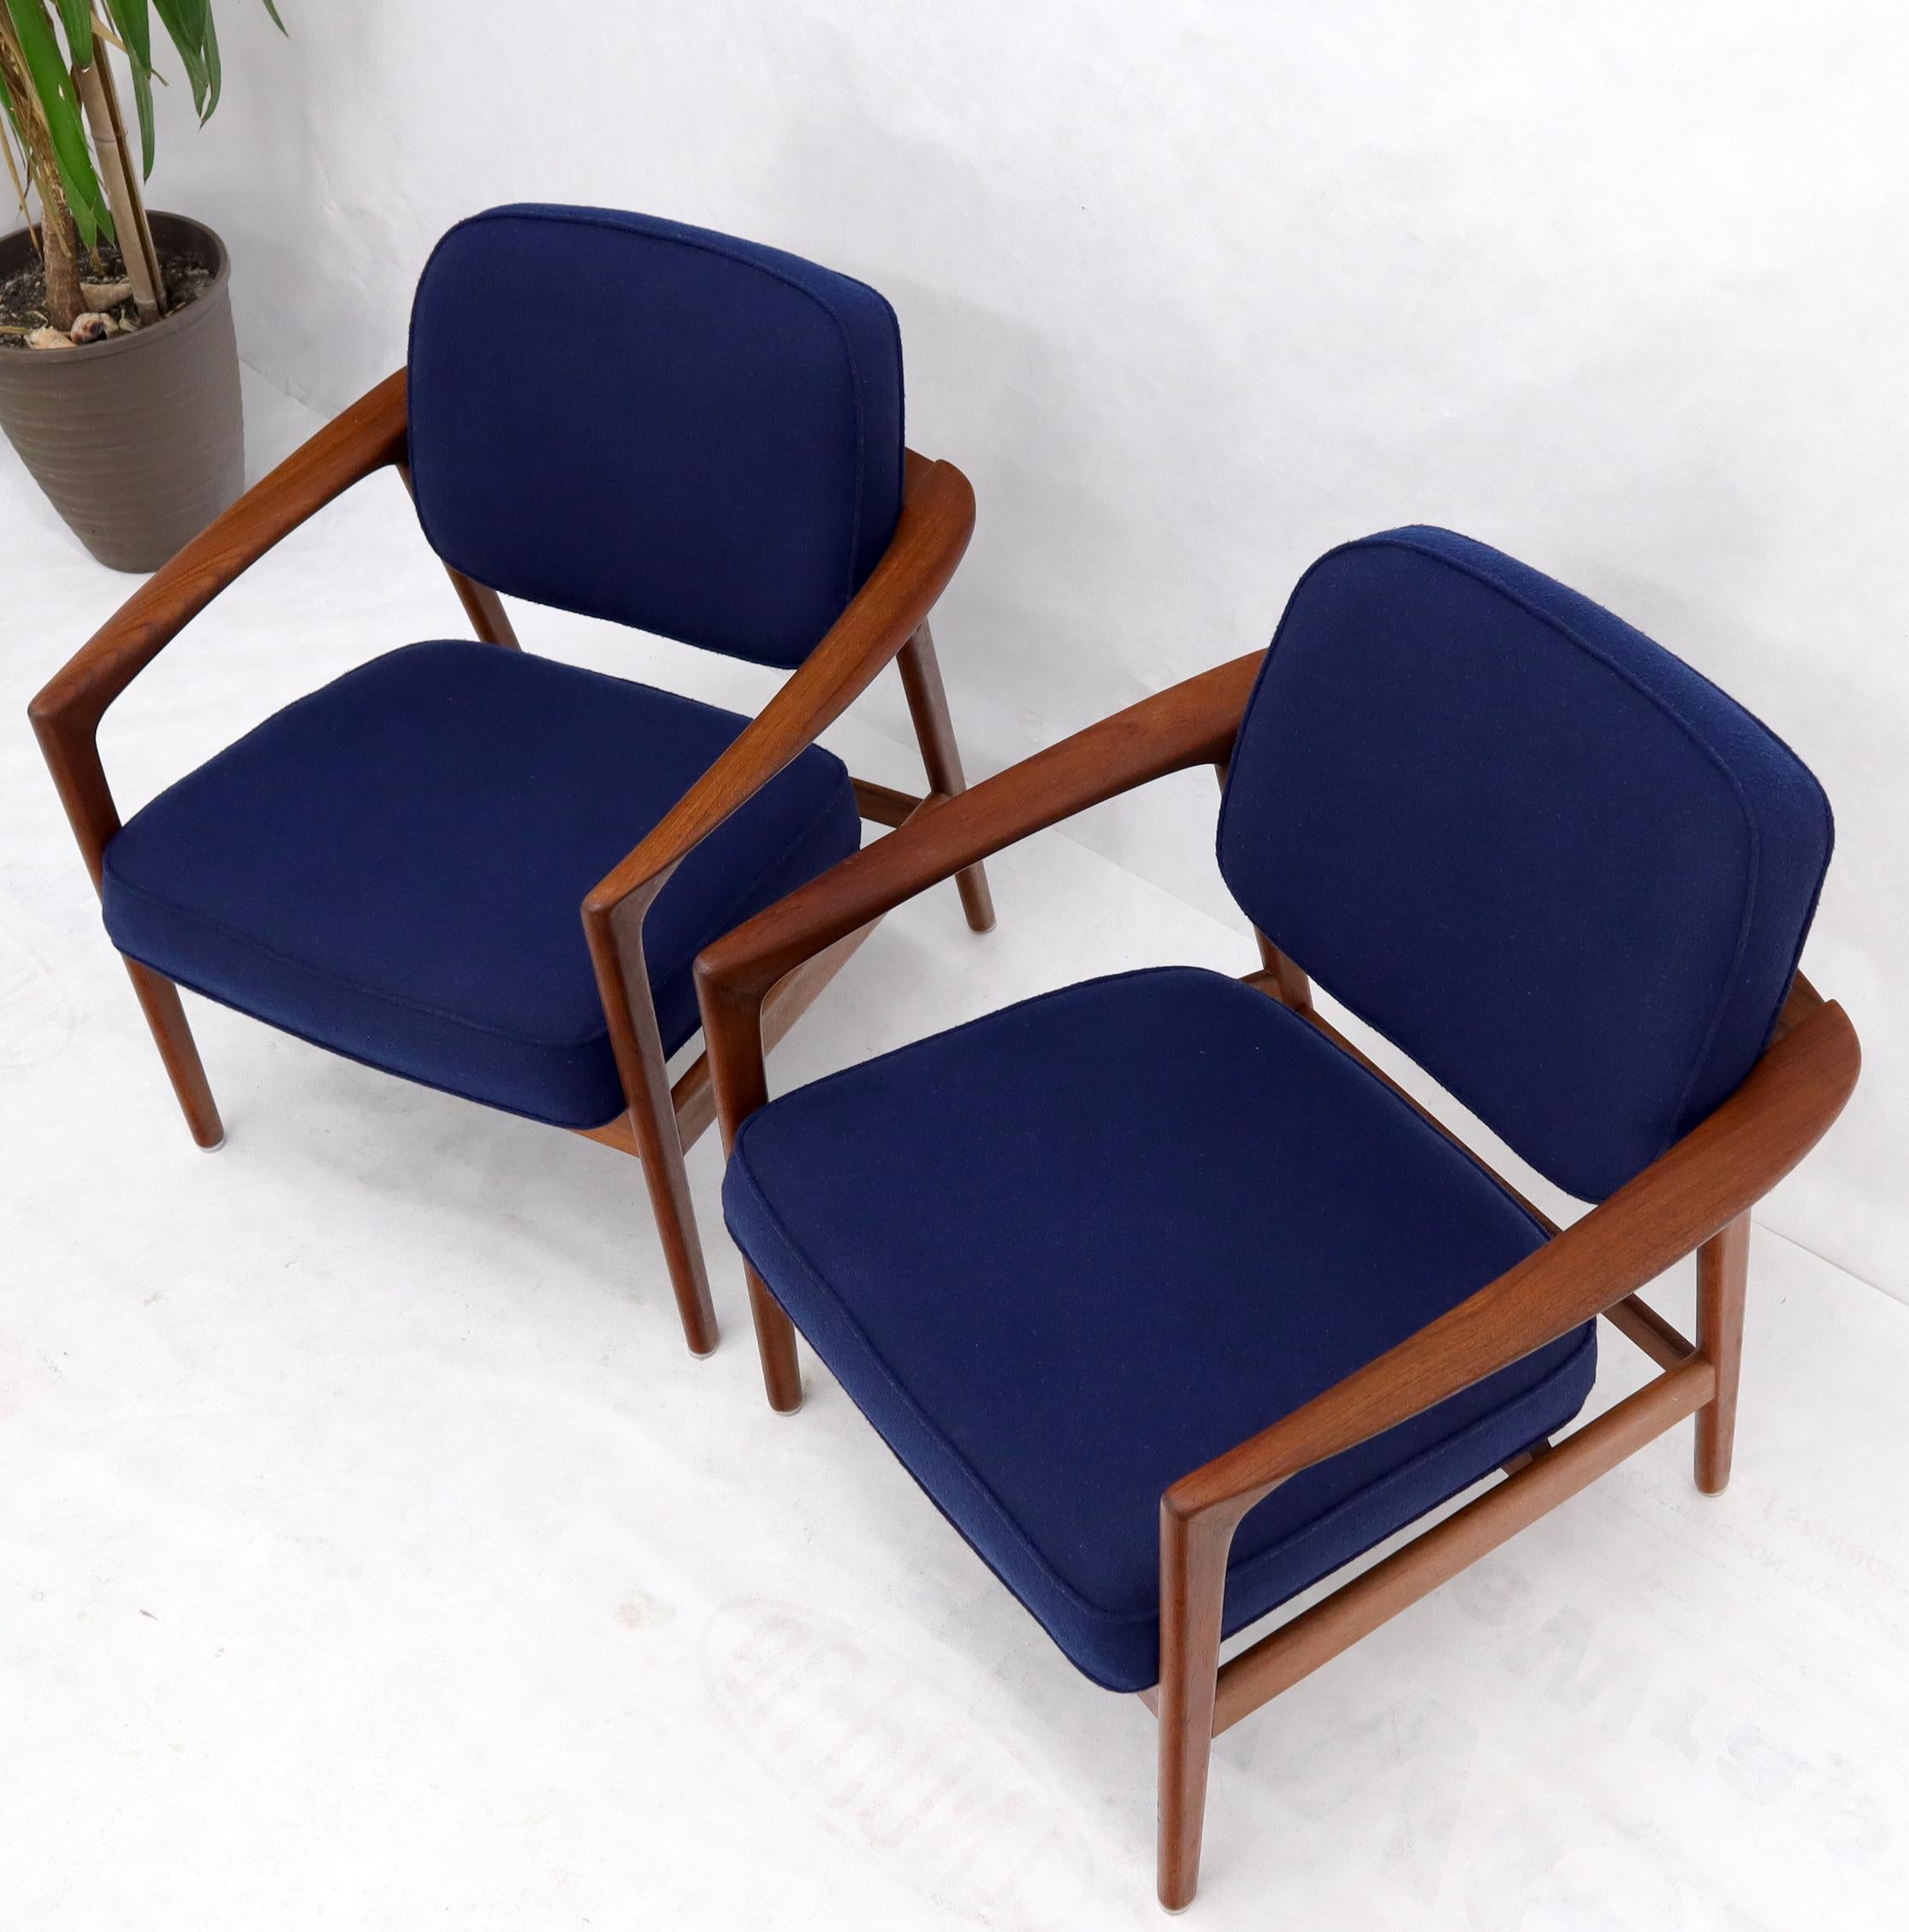 Pair of New Blue Upholstery Teak Danish Mid-Century Modern Arm Lounge Chairs In Excellent Condition For Sale In Rockaway, NJ